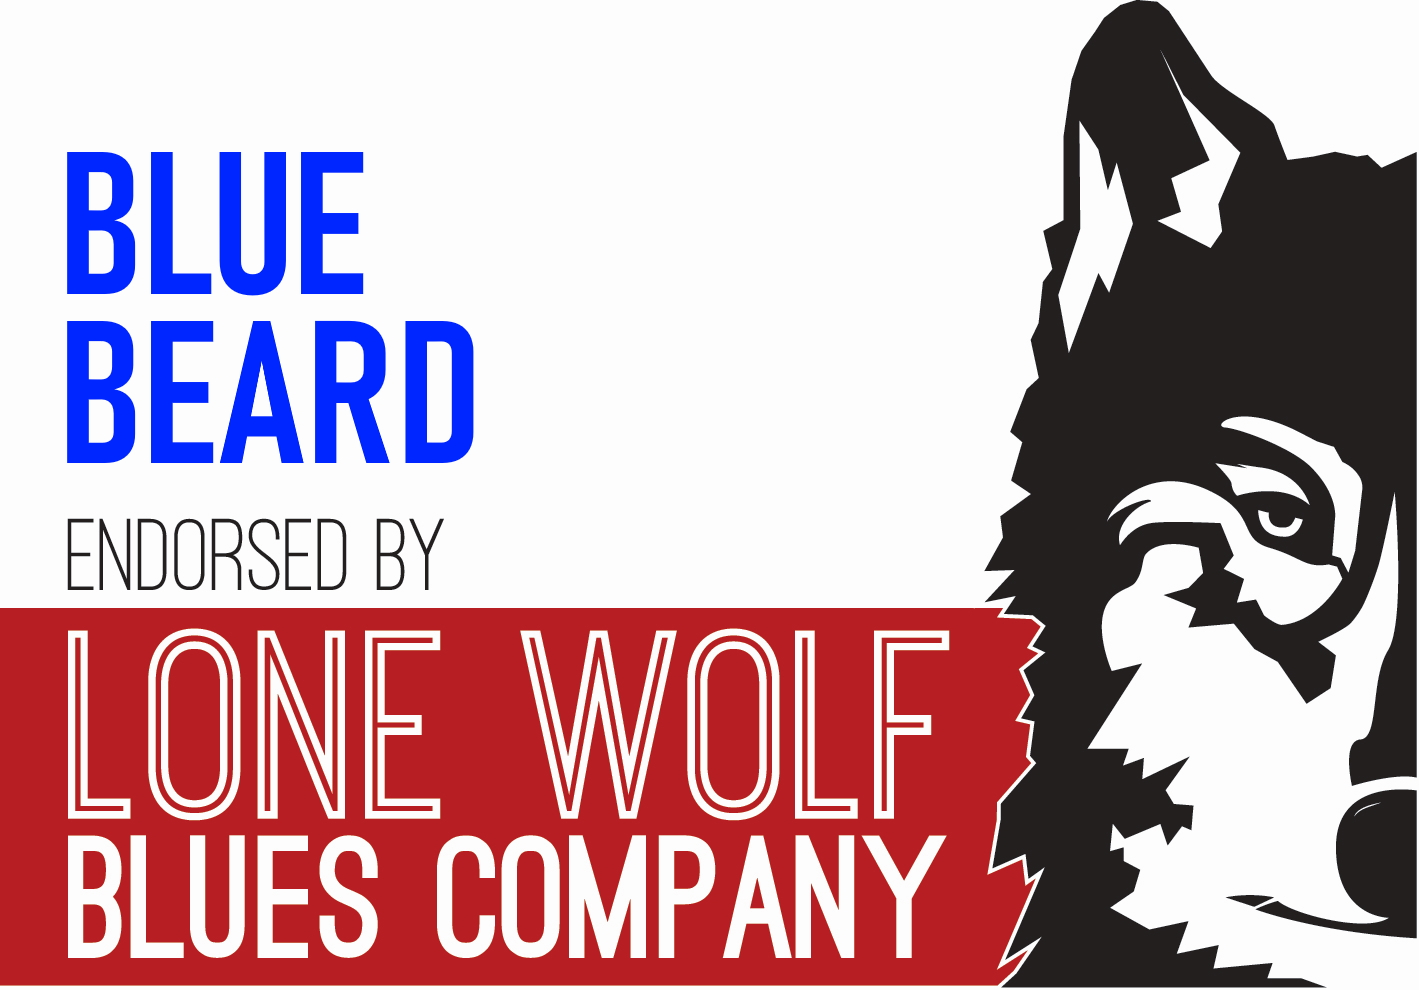 Bluebeard Endorsed by Lone Wolf